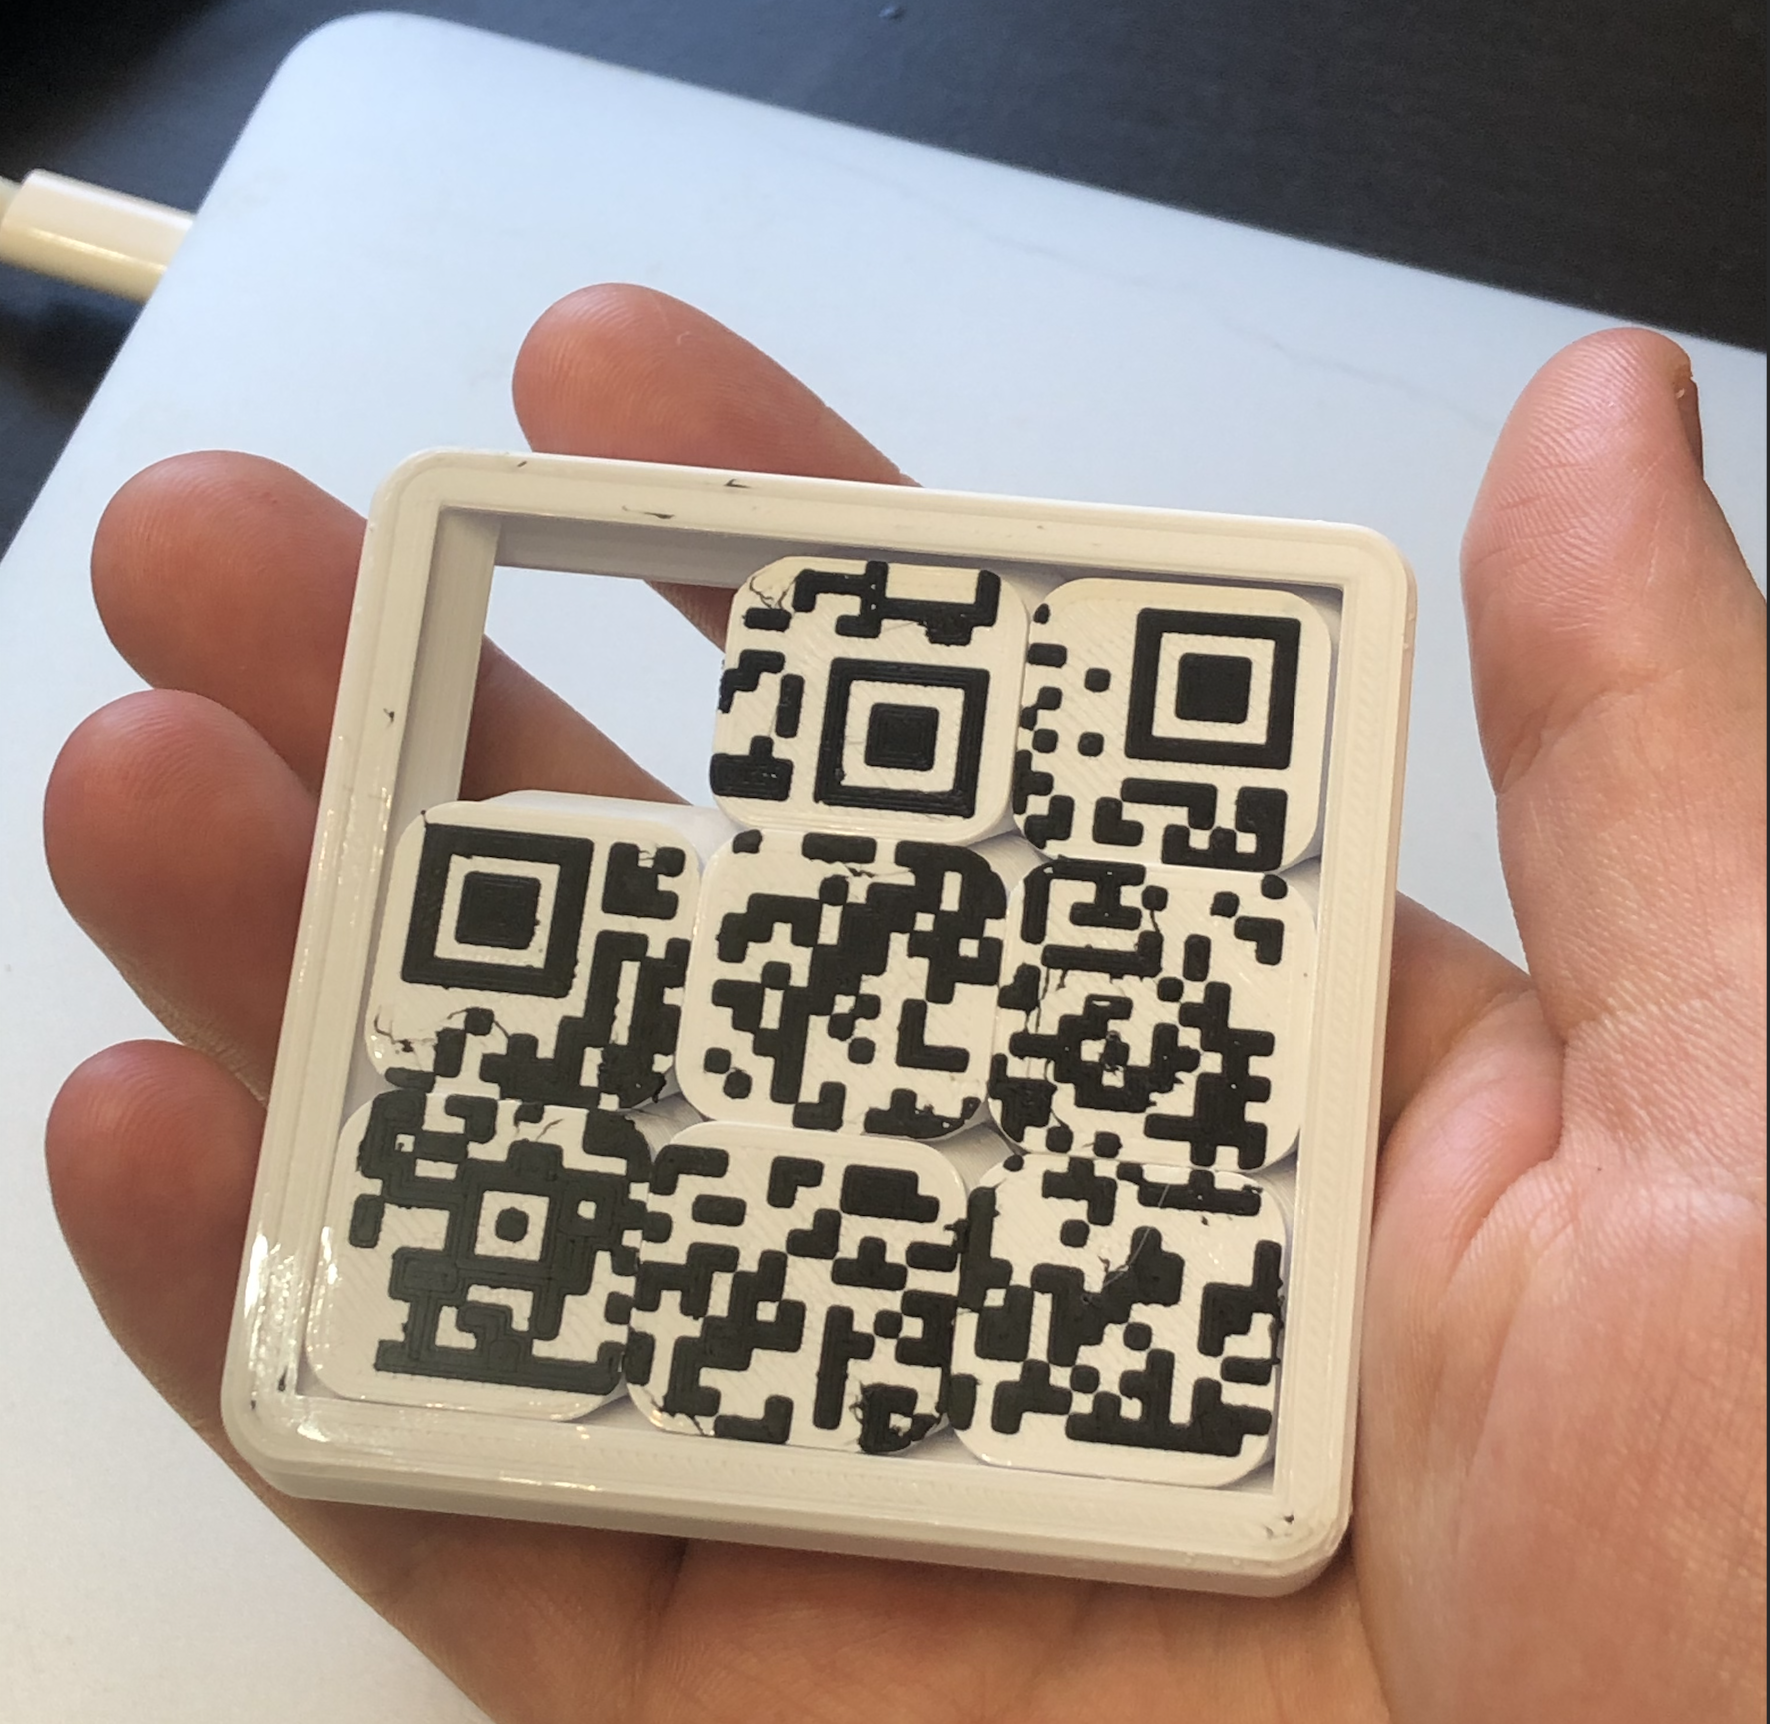 Sliding puzzle with a QR code